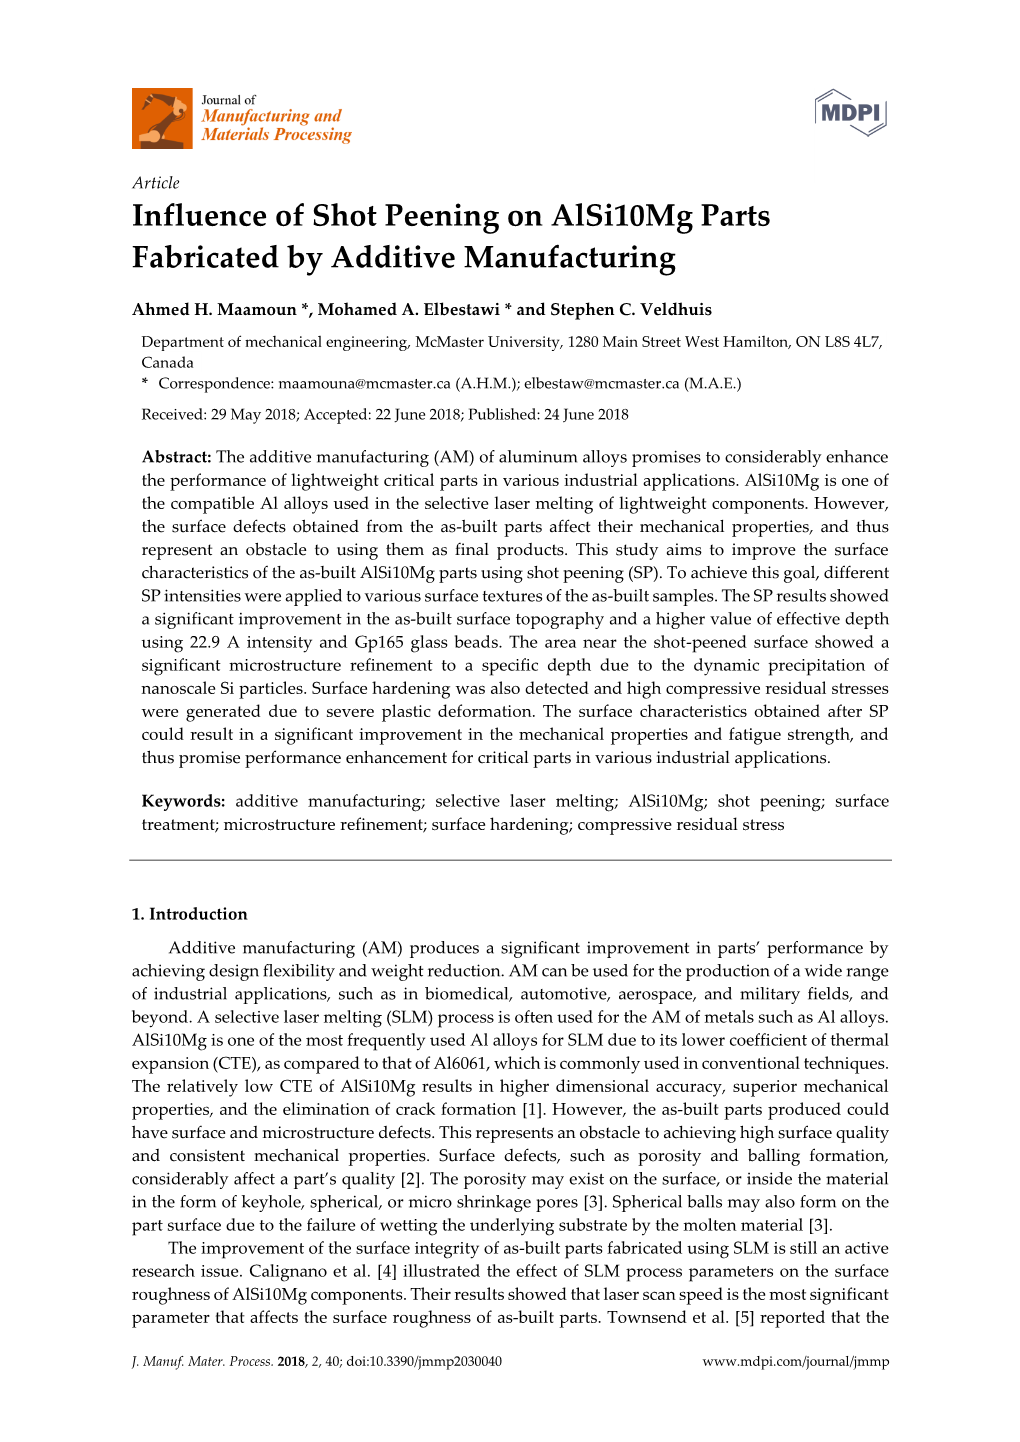 Influence of Shot Peening on Alsi10mg Parts Fabricated by Additive Manufacturing